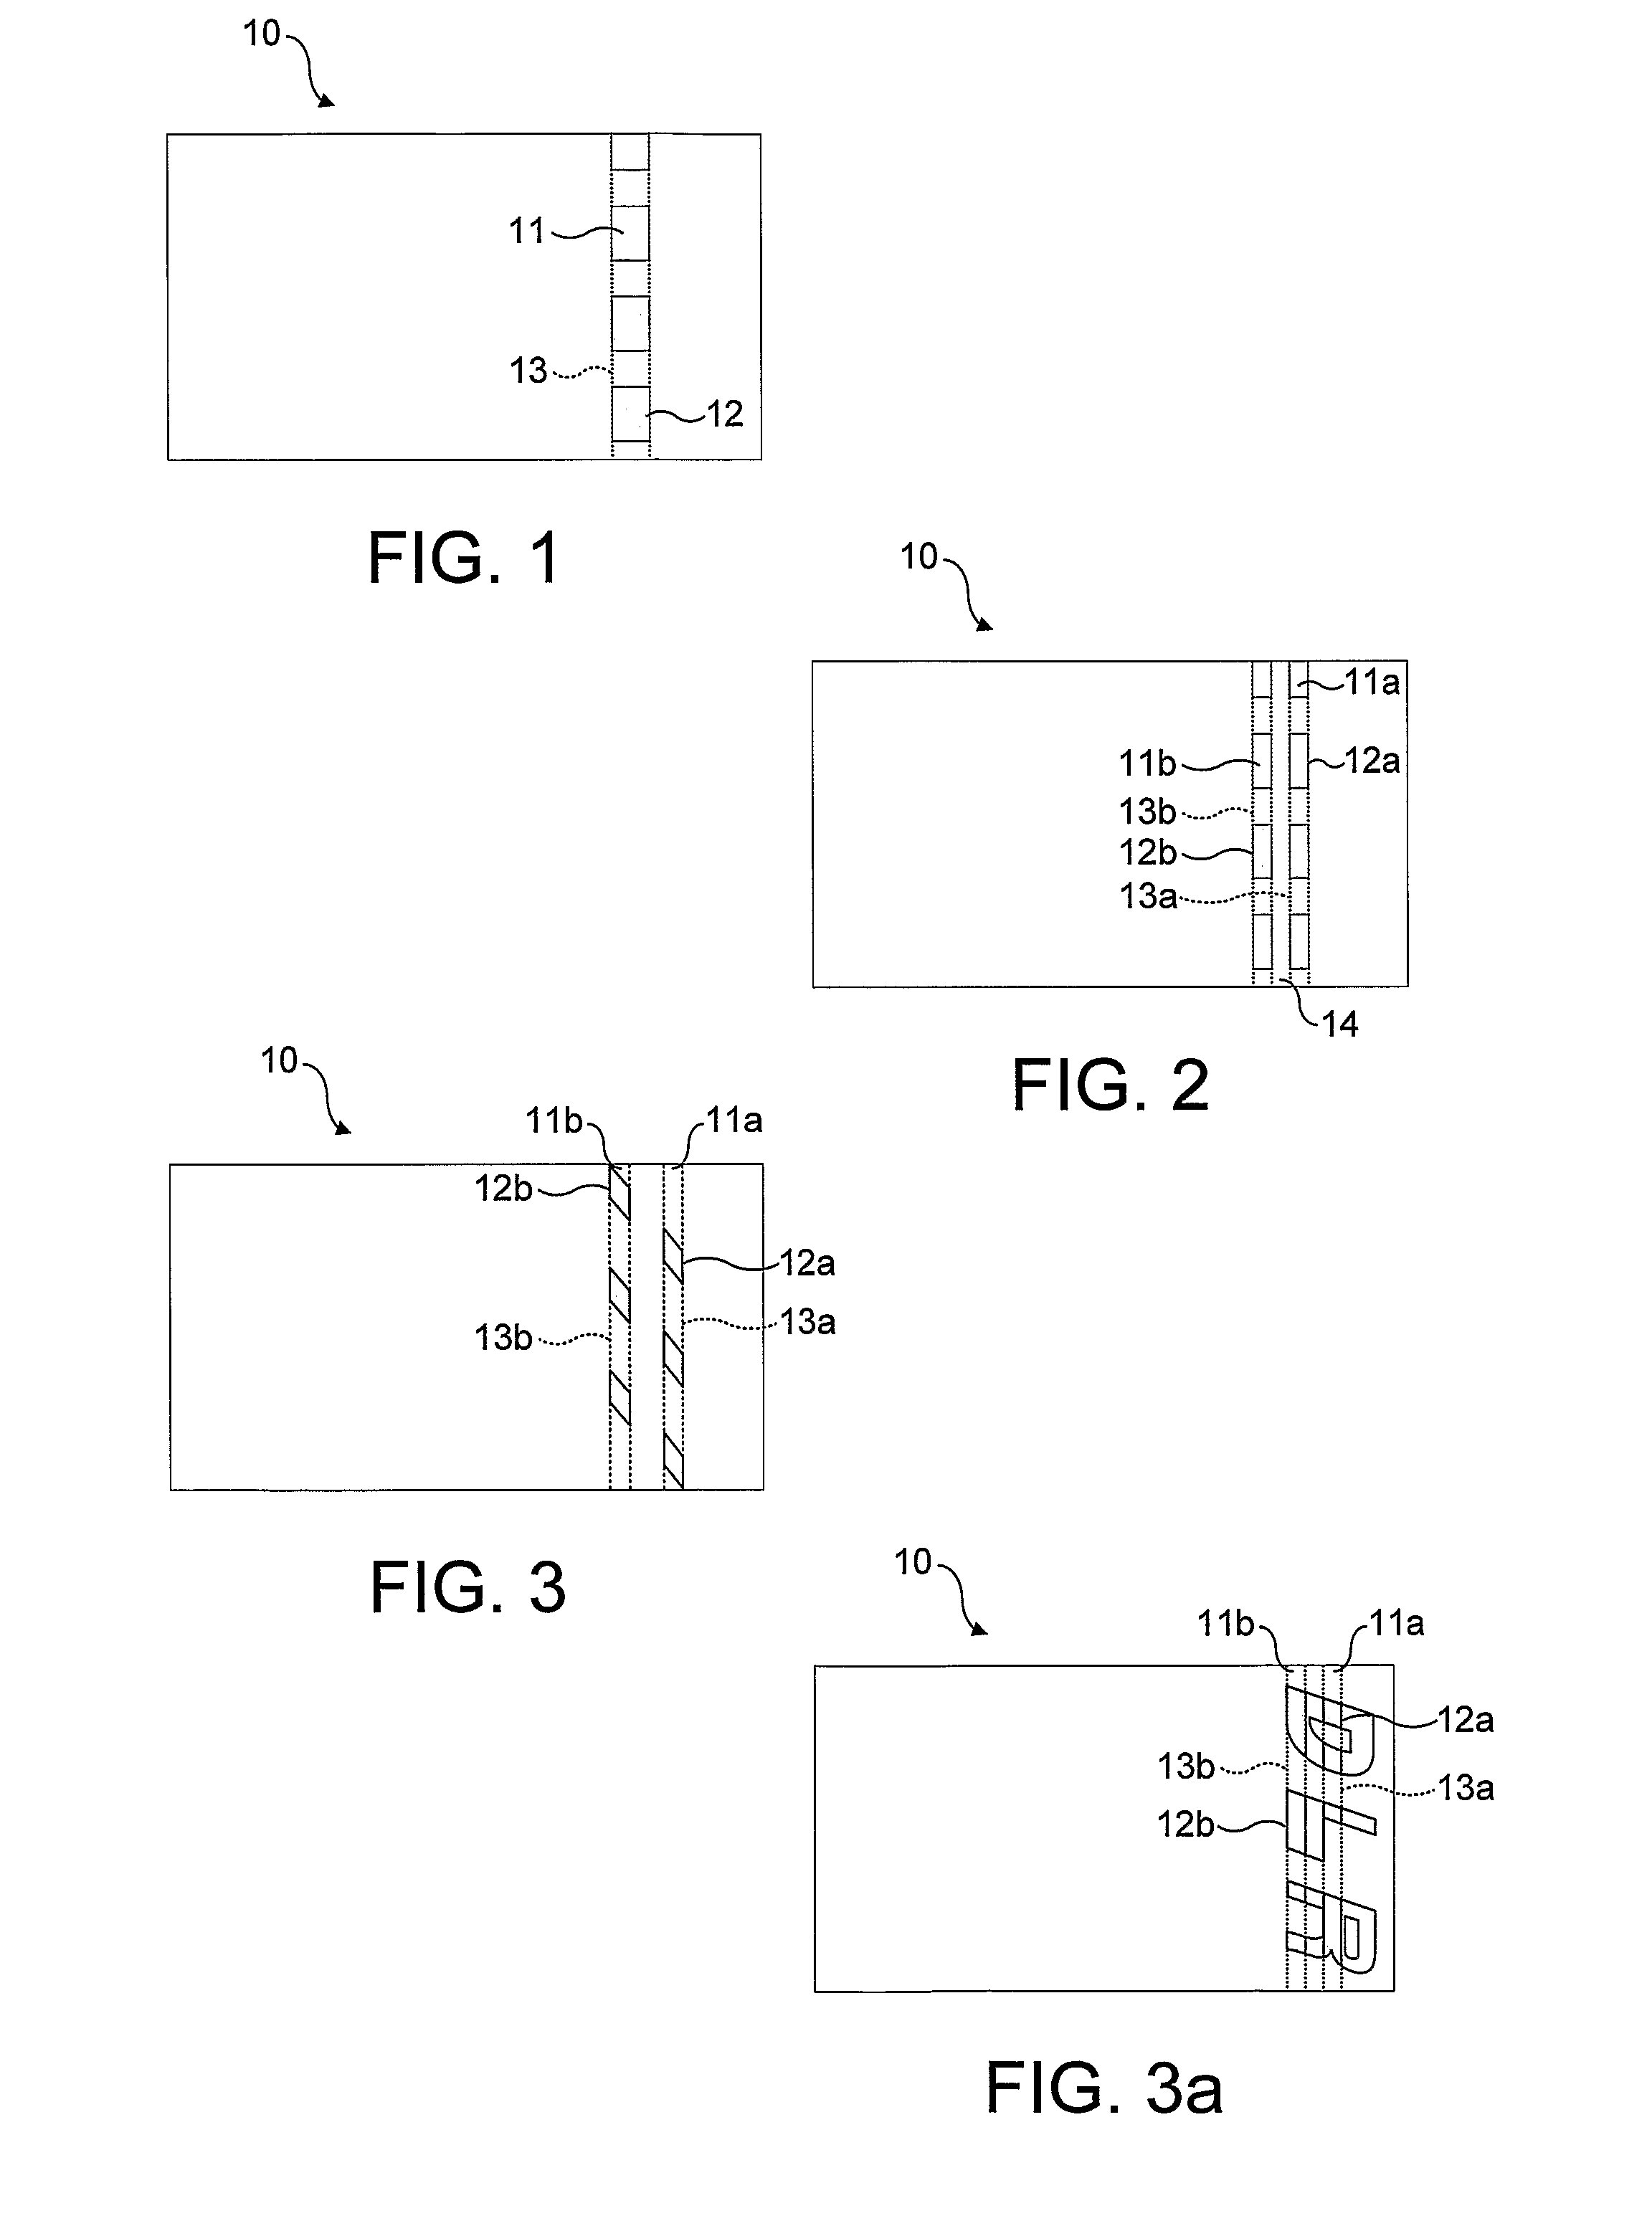 Security substrate incorporating elongate security elements